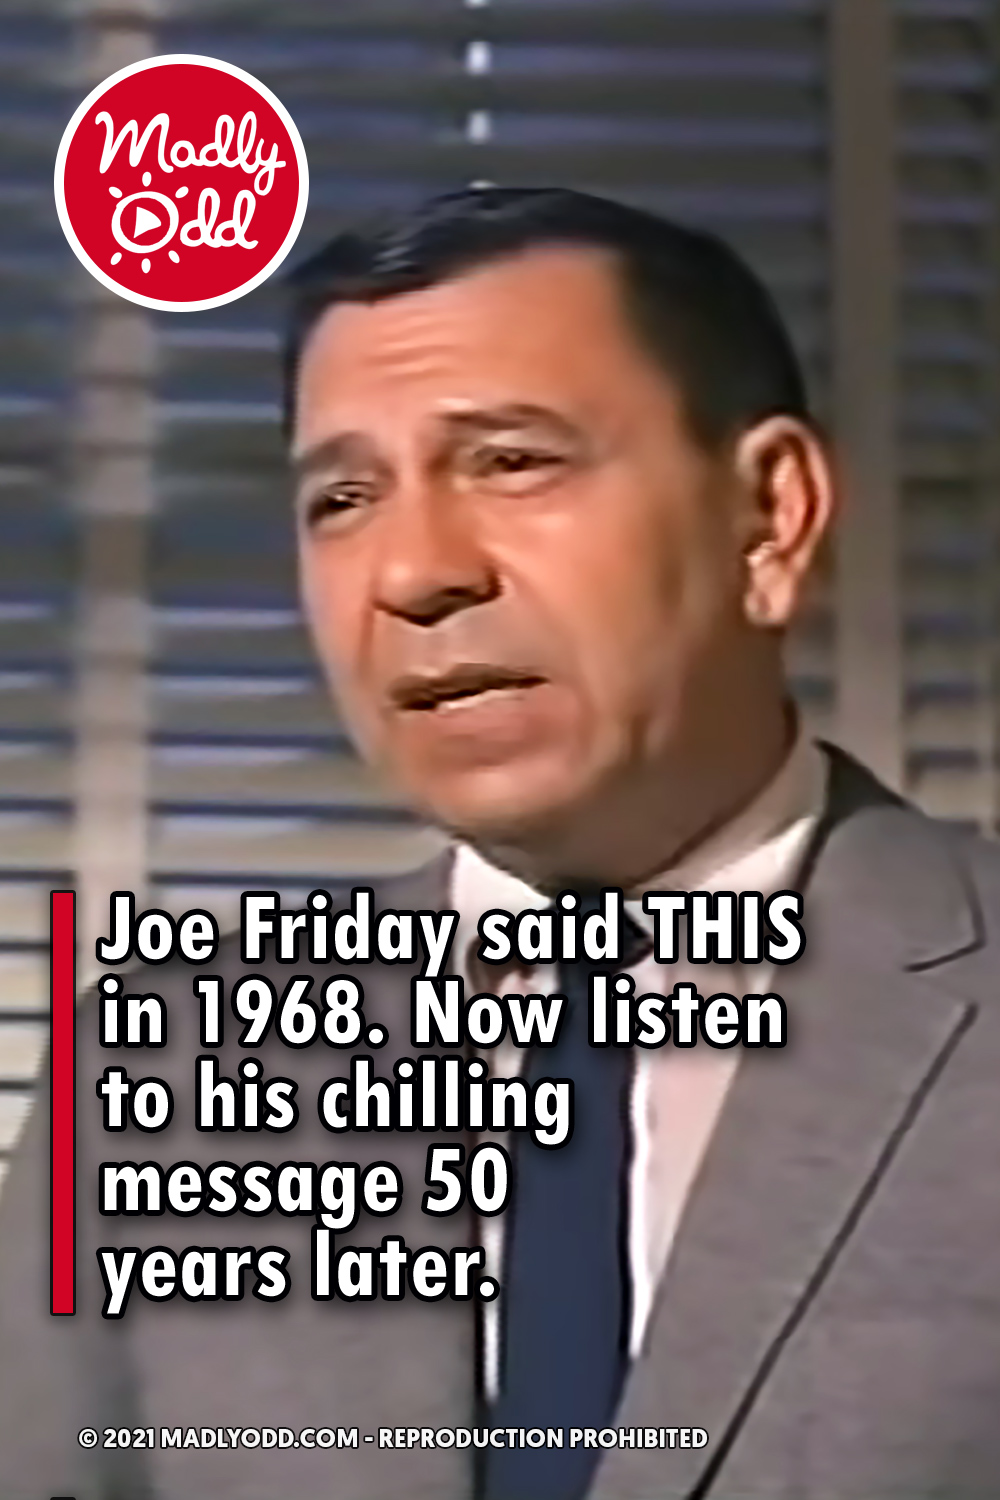 Joe Friday said THIS in 1968. Now listen to his chilling message 50 years later.